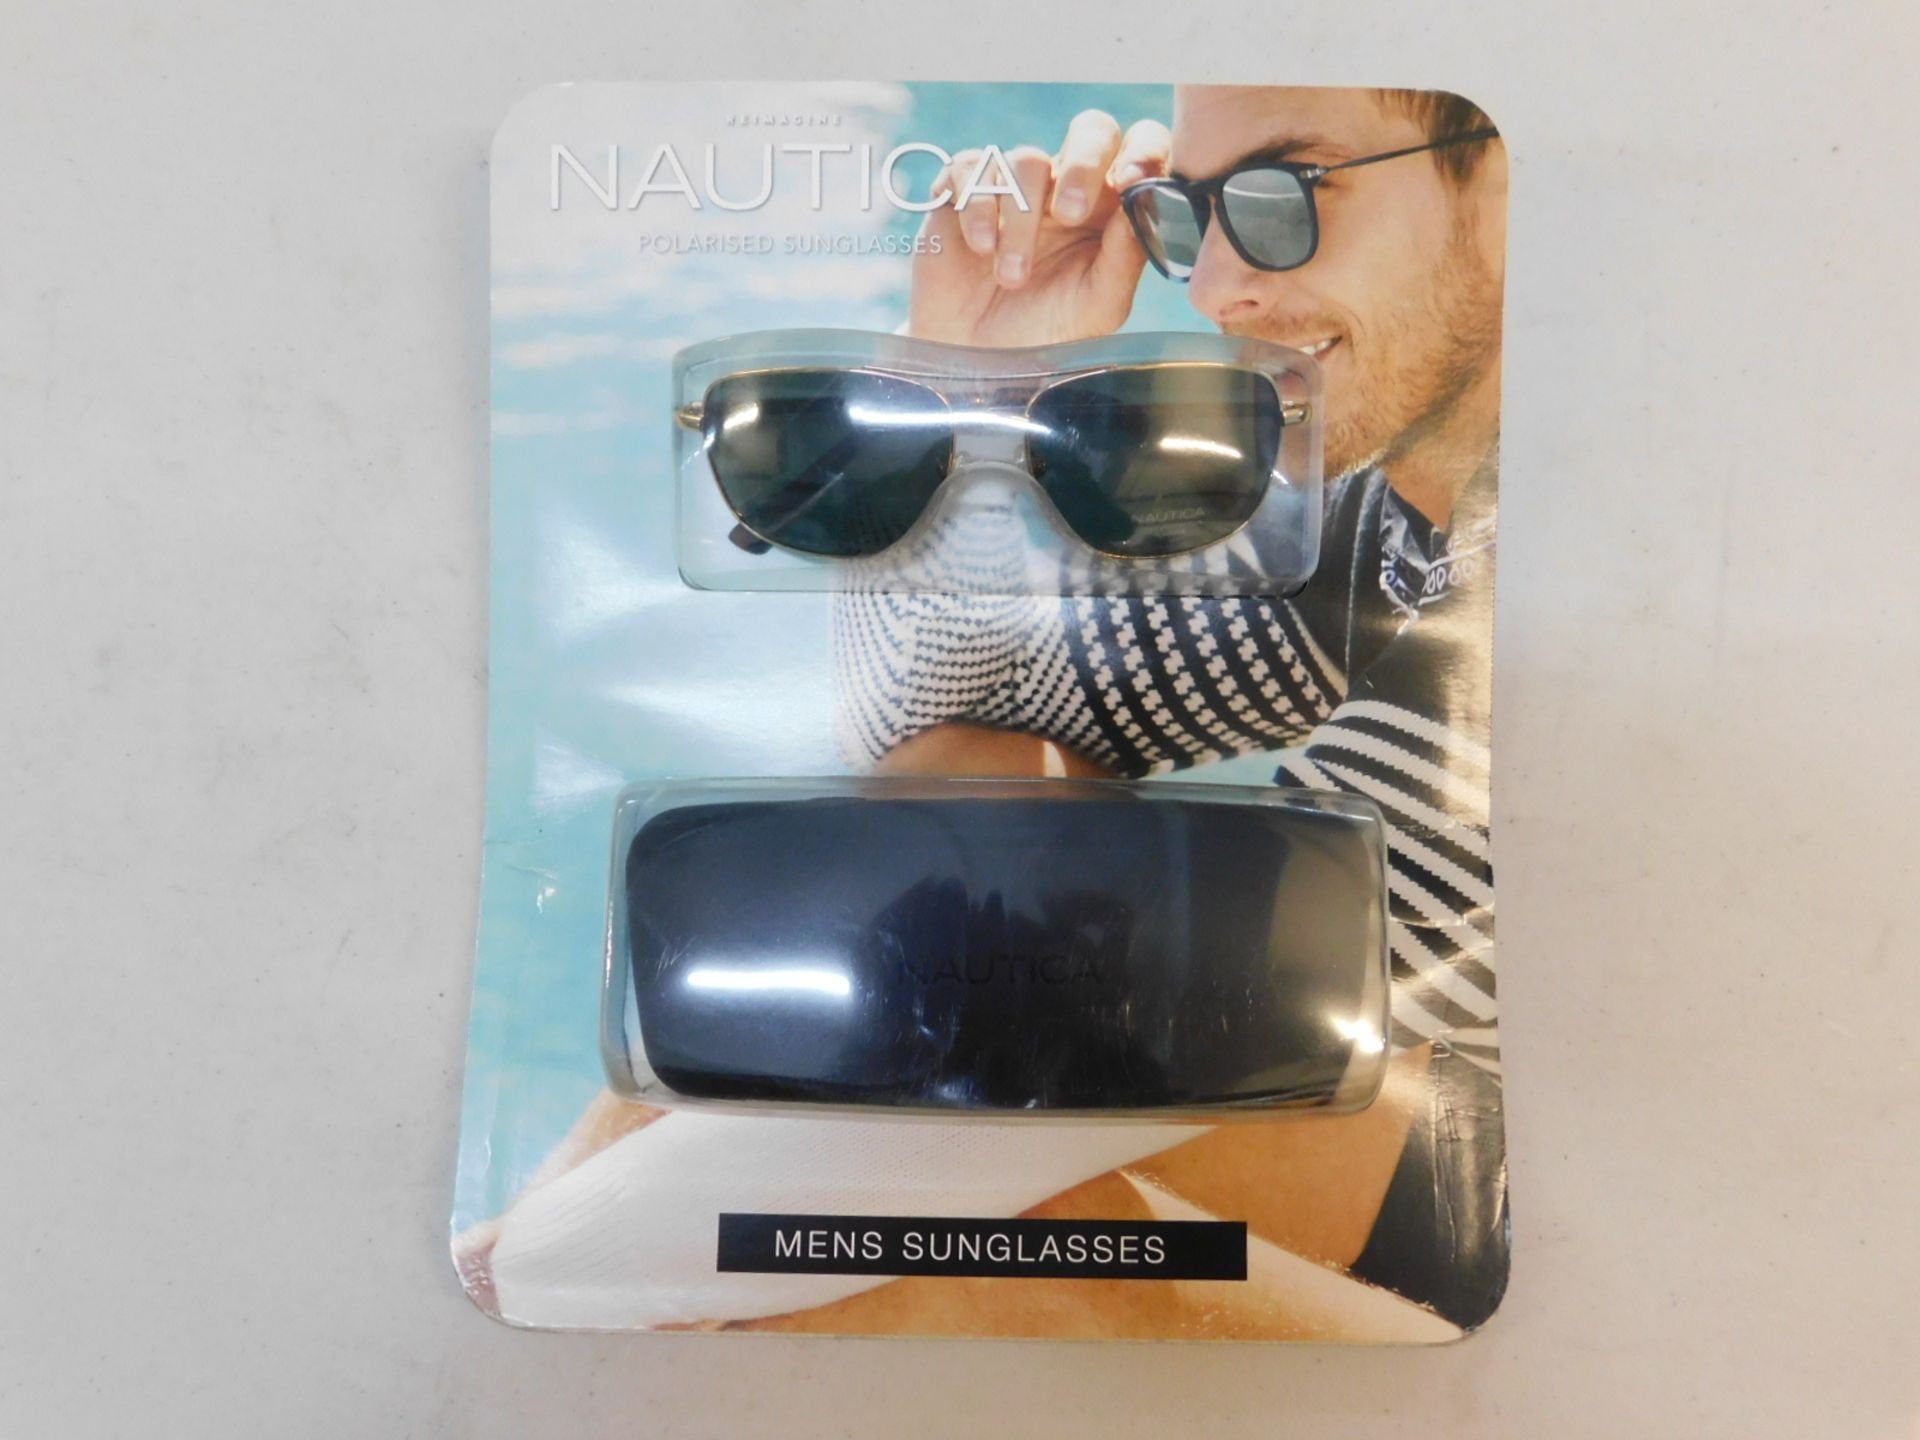 1 BRAND NEW PACK OF NAUTICA GENTS SUNGLASSES WITH CARRY CASE RRP Â£99